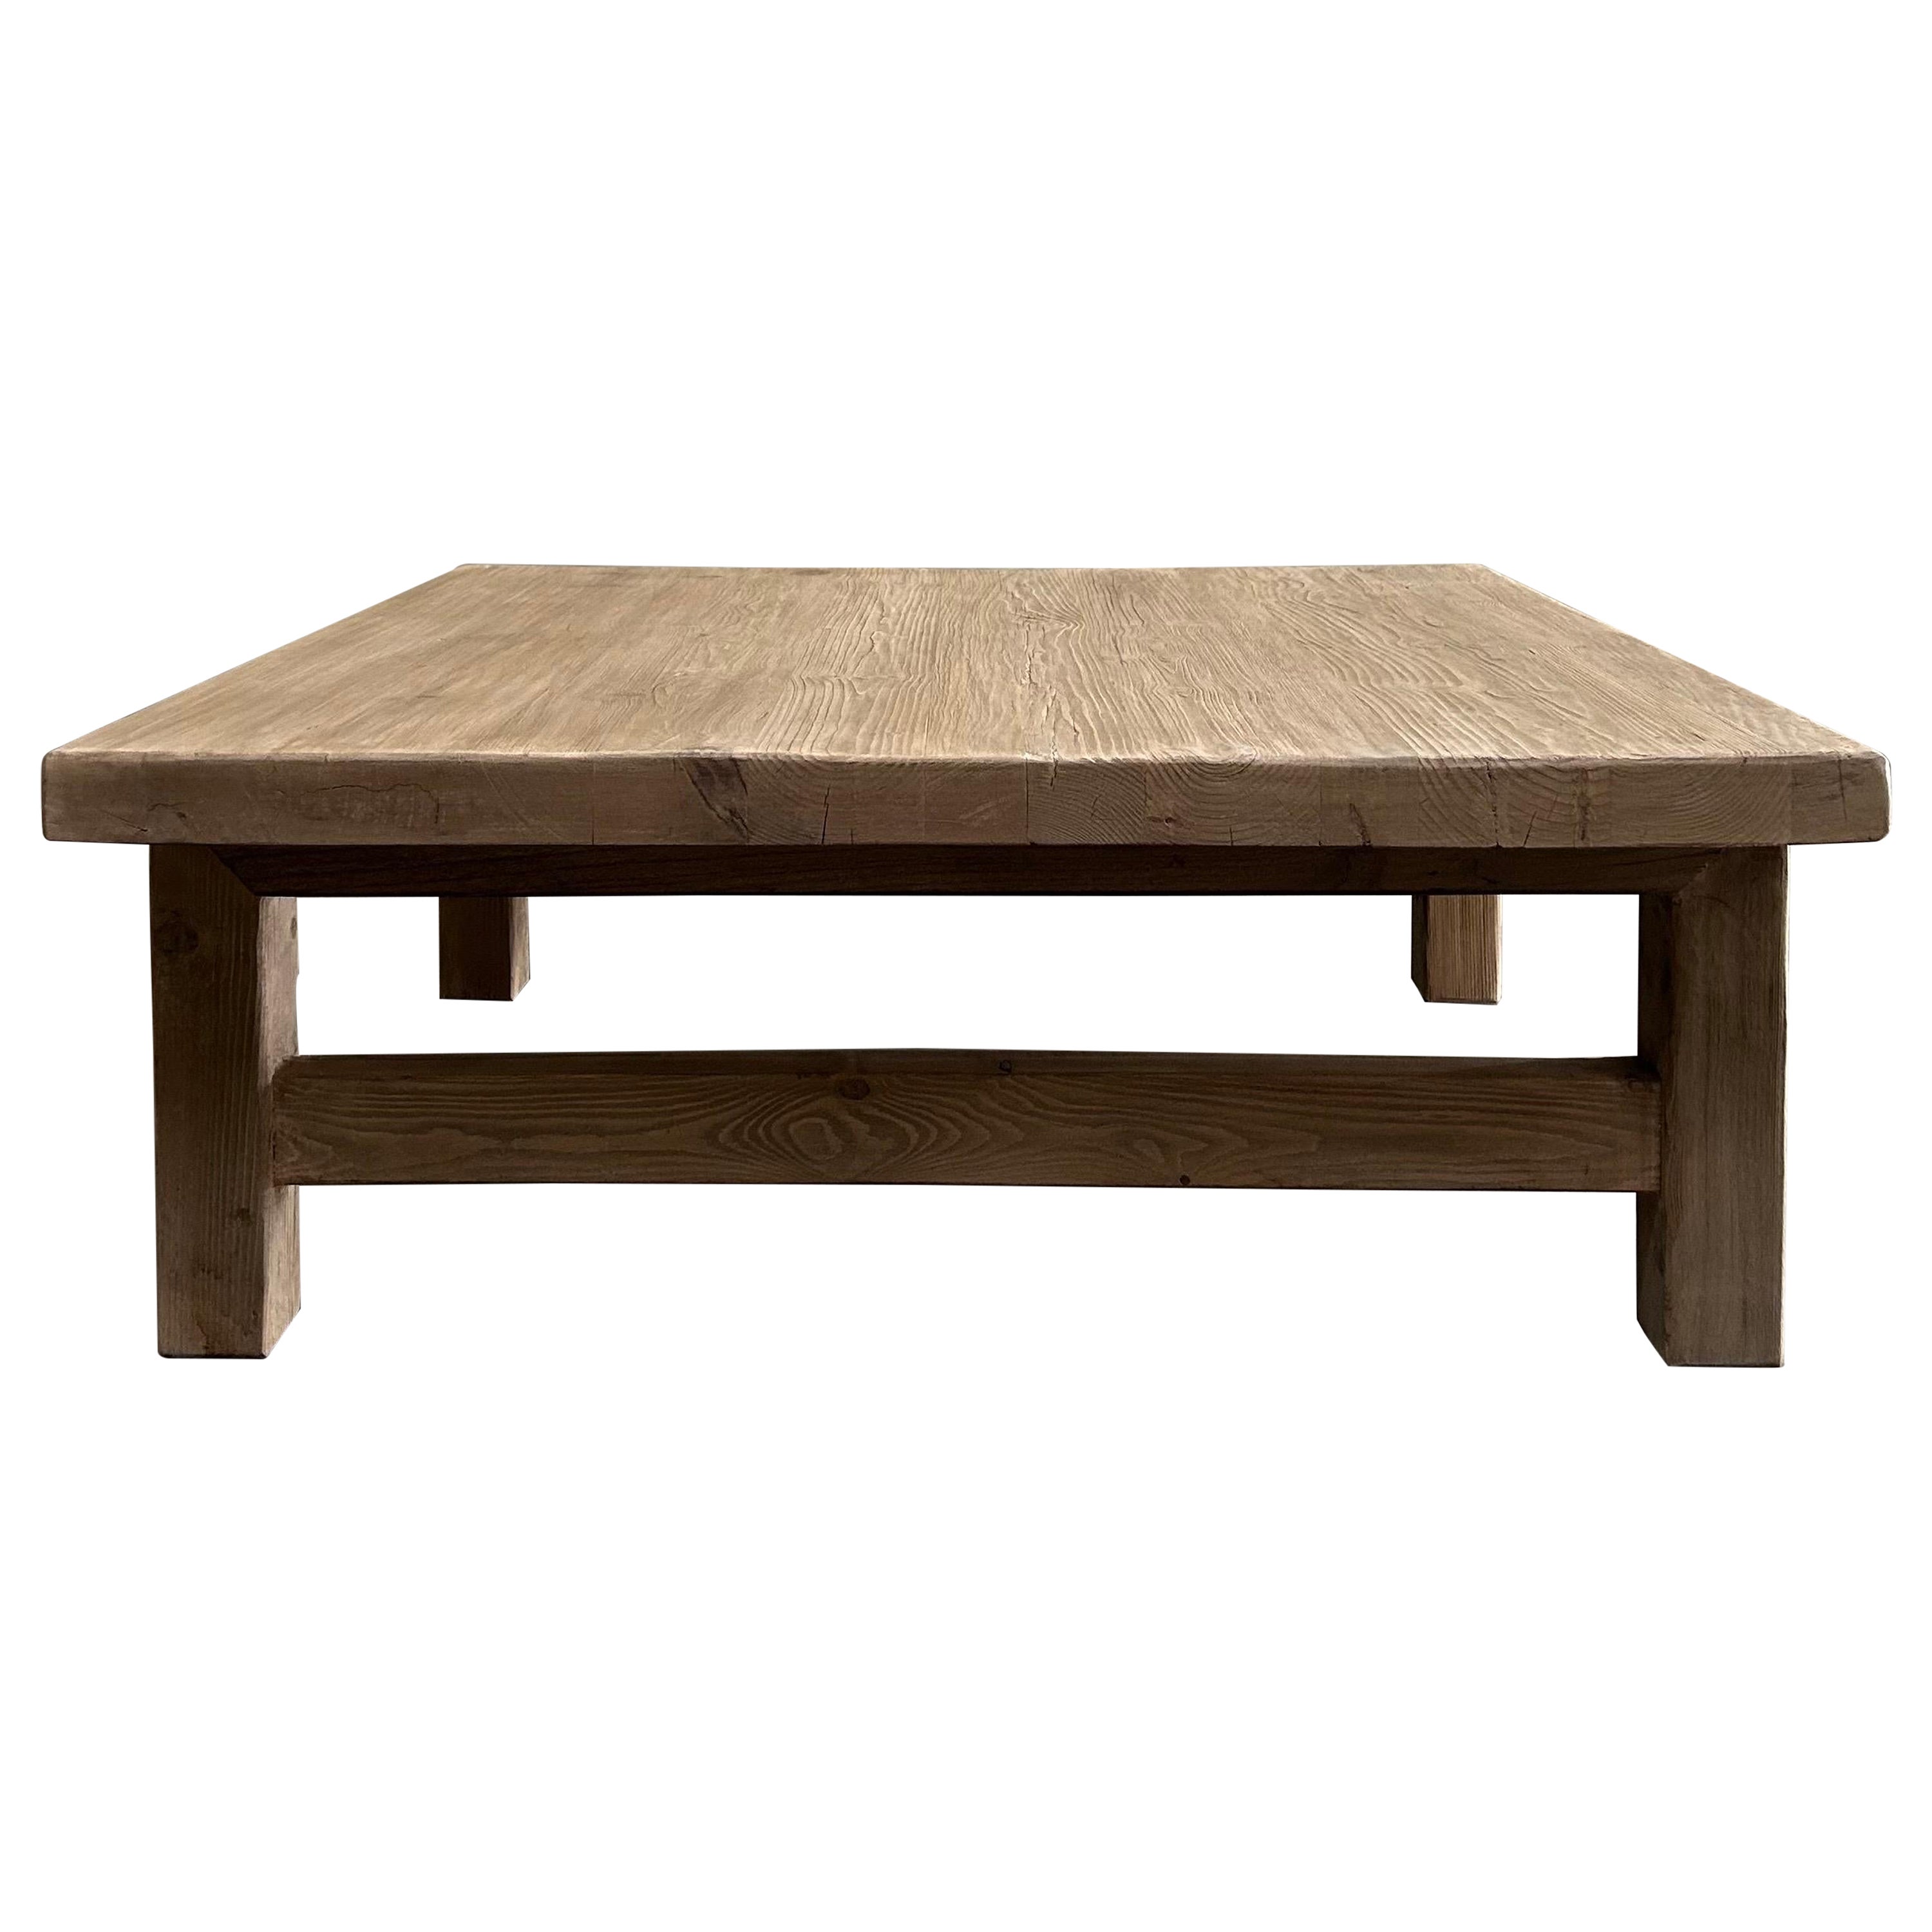 Custom Made Reclaimed Elm Wood Square Coffee Table For Sale